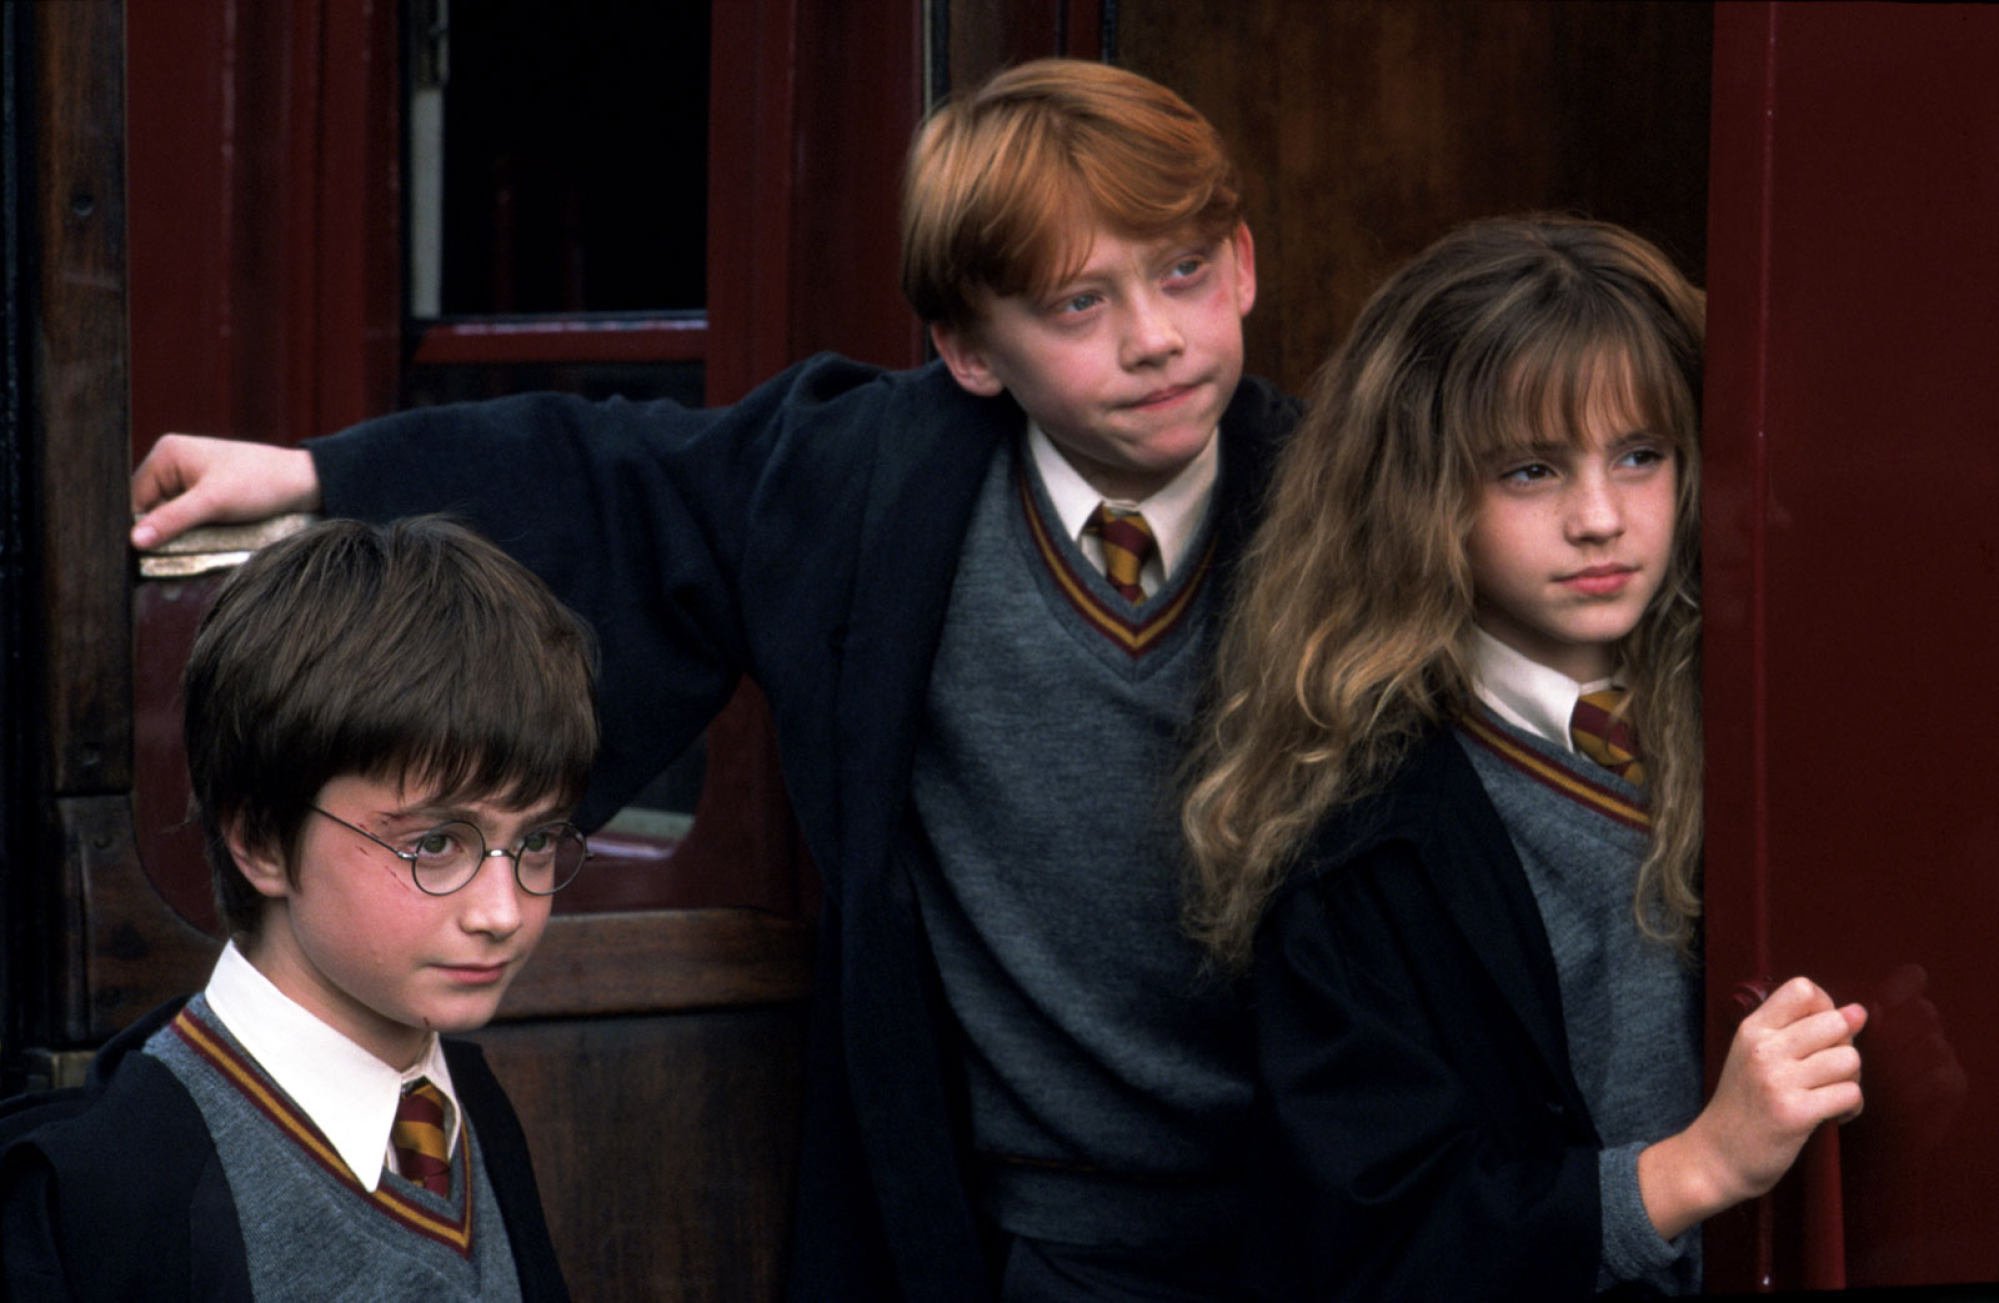 Daniel Radcliffe, Rupert Grint and Emma Watson in Harry Potter and the Philosopher’s Stone. Photo: Warner Bros. Pictures